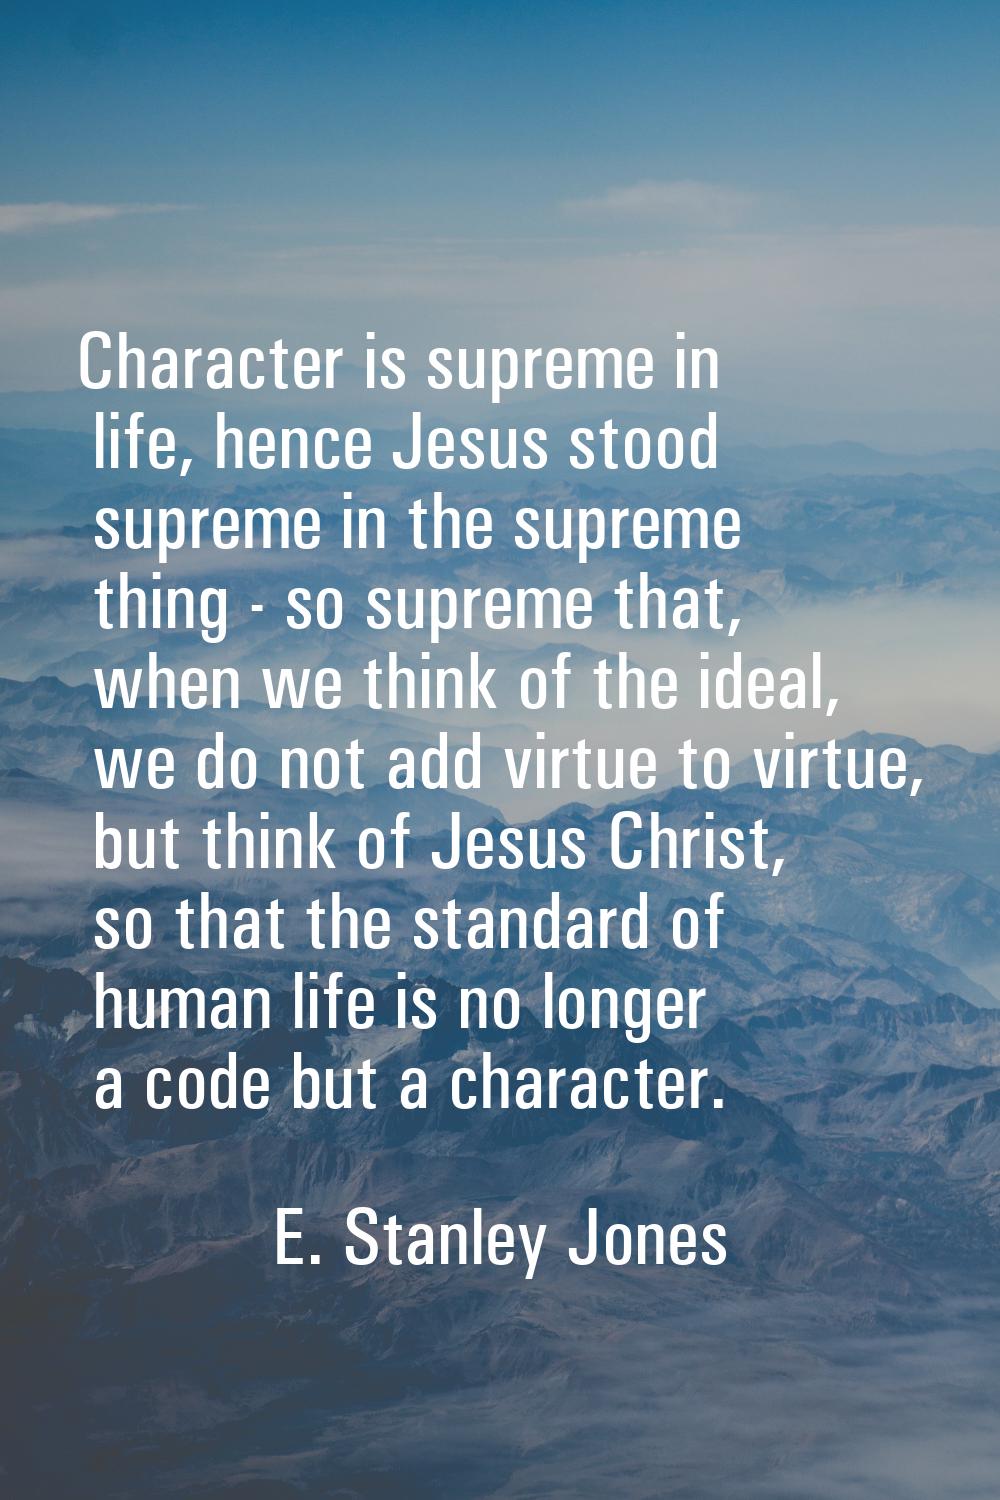 Character is supreme in life, hence Jesus stood supreme in the supreme thing - so supreme that, whe